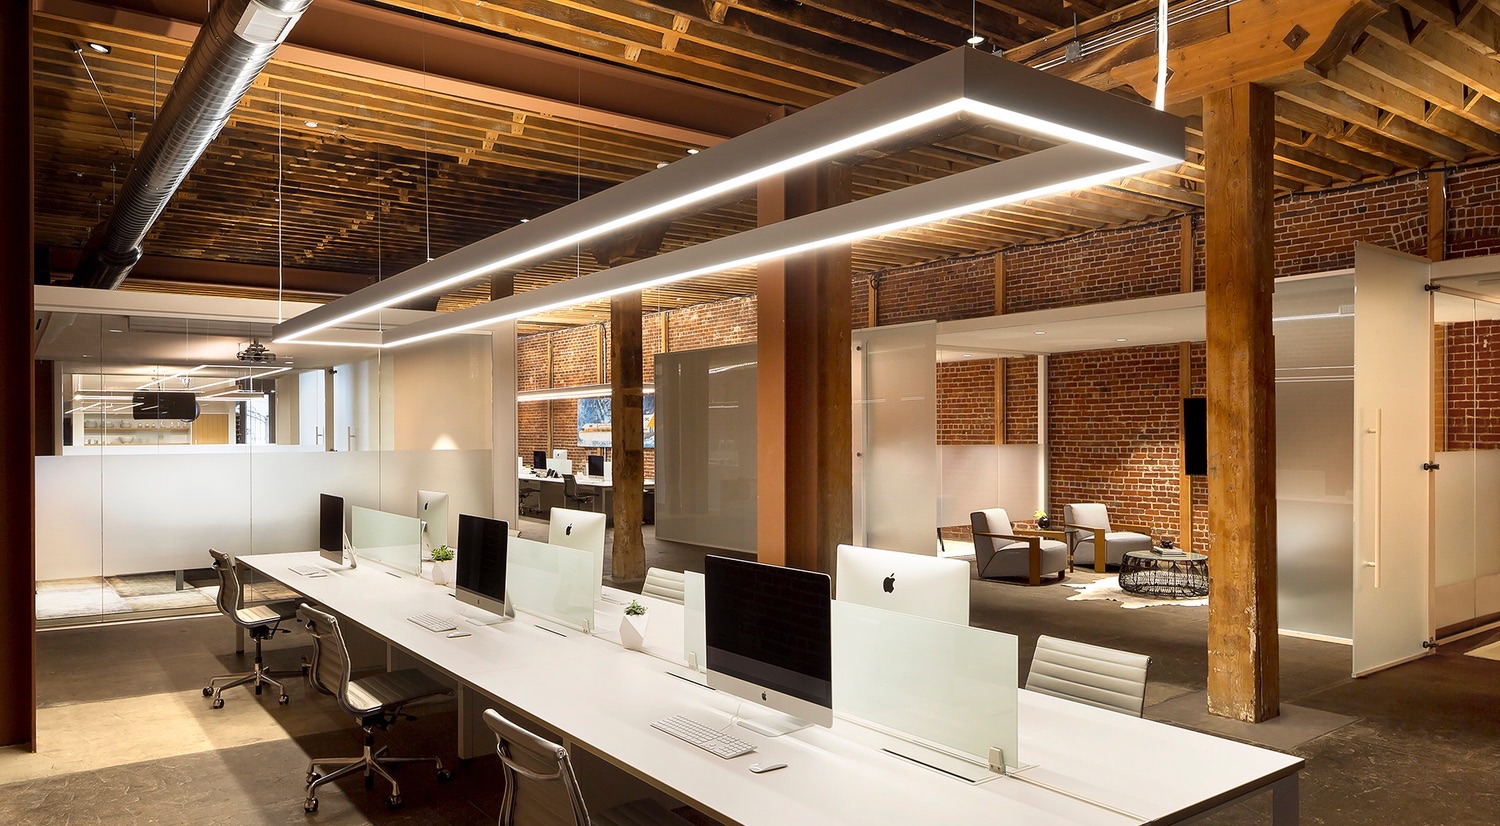 How would this rectangular pendant LED office lighting compare vs fluorescent alternatives?